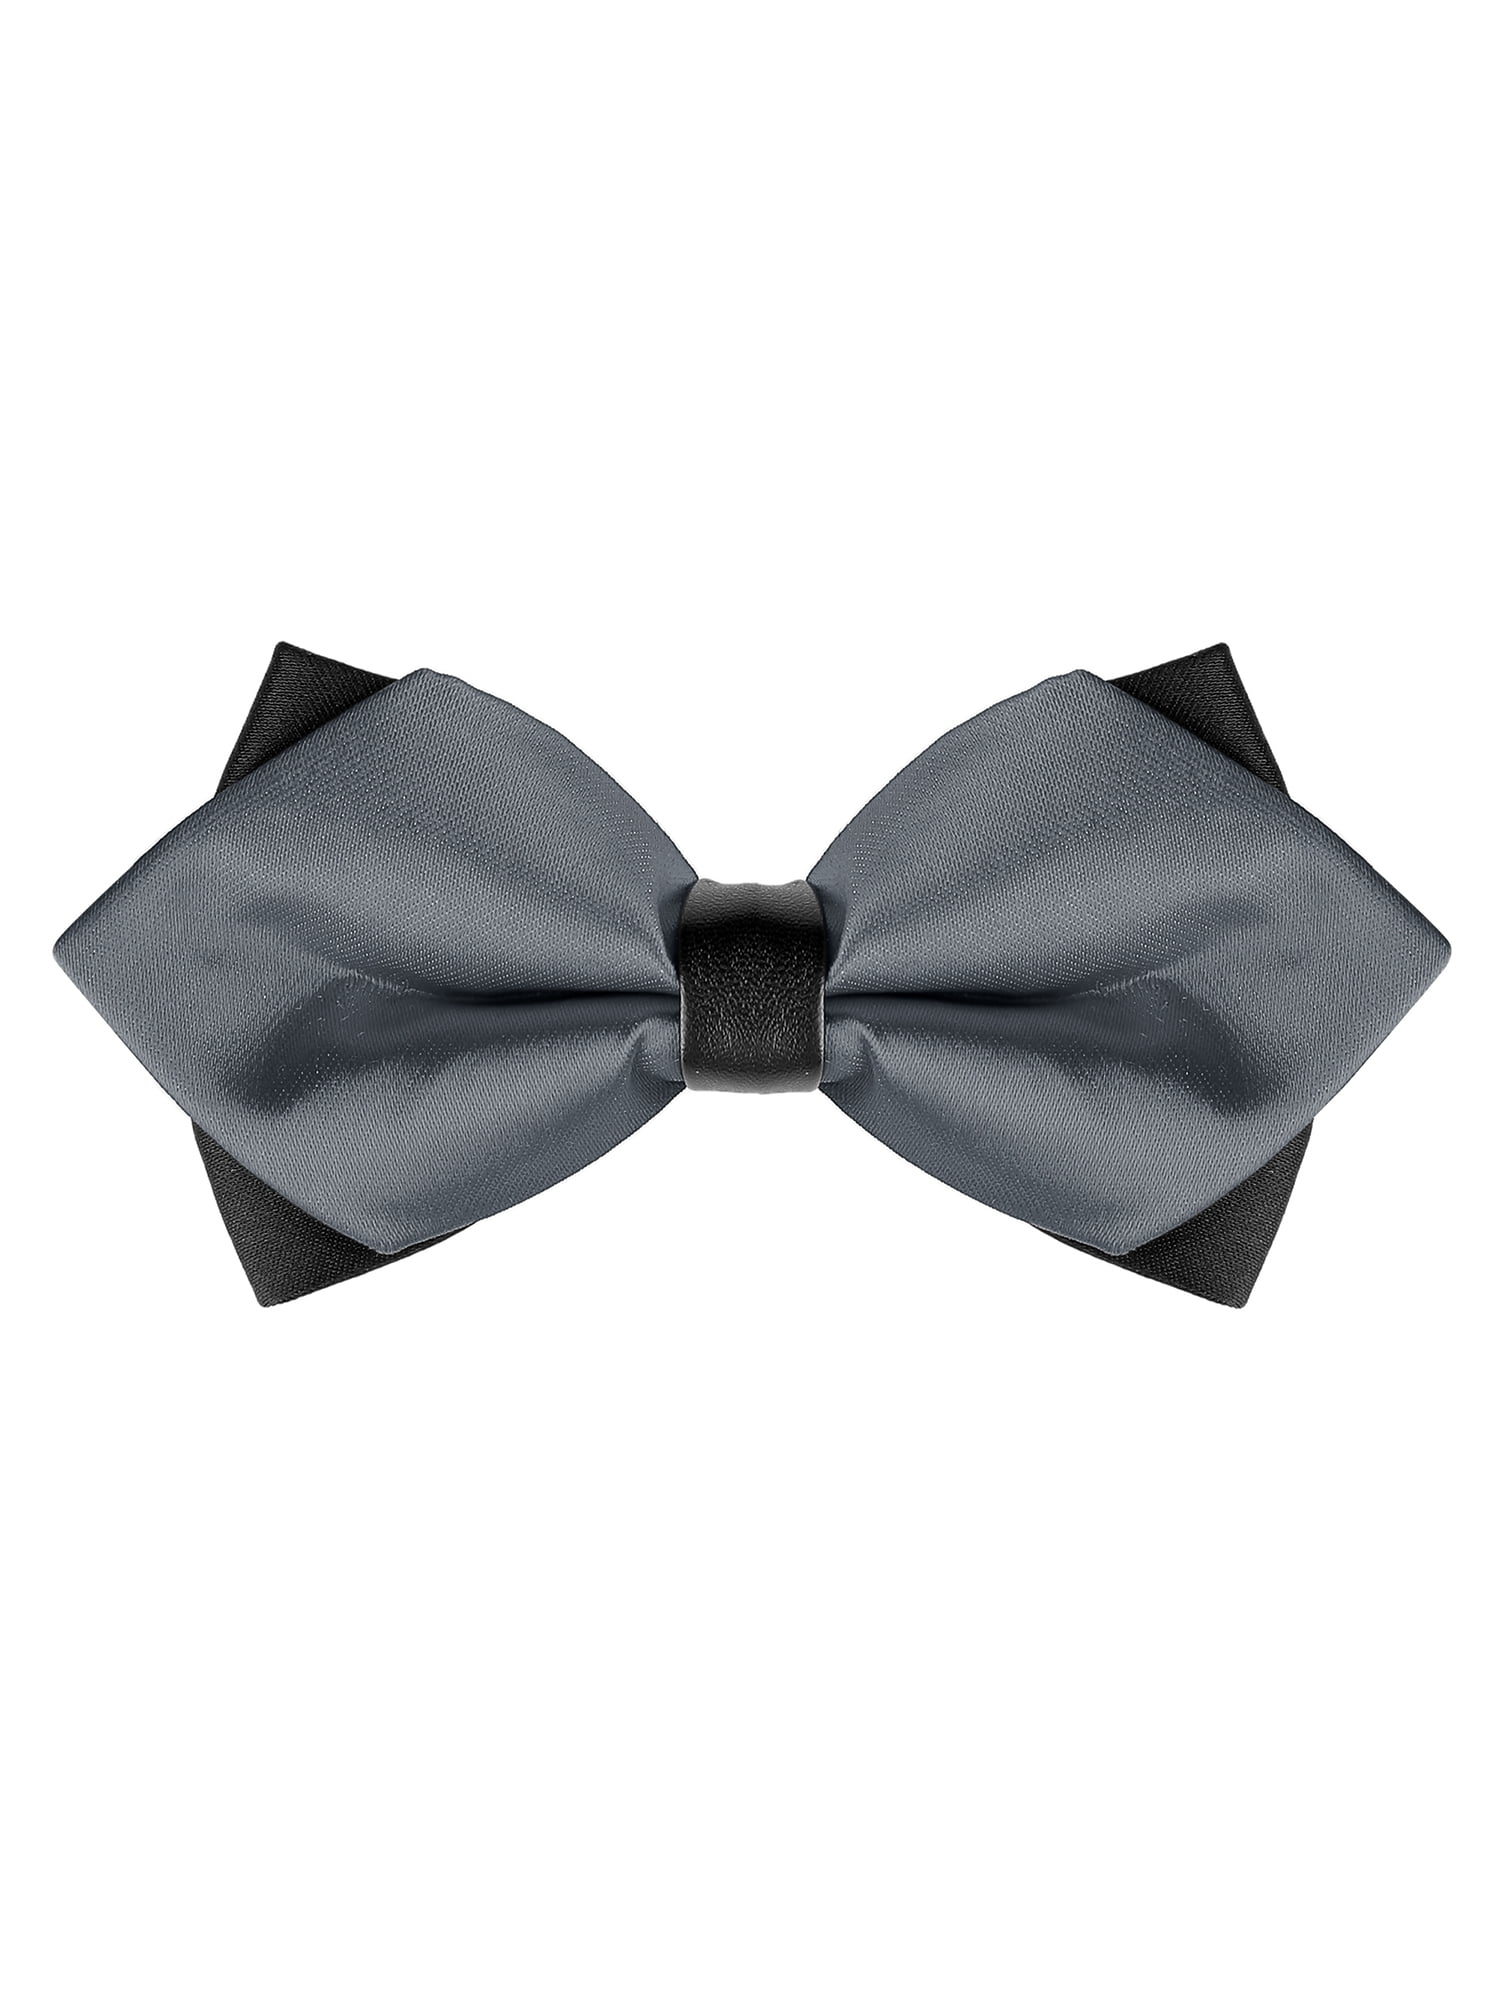 New in box men's silk pre-tied bow tie white wedding formal prom party 